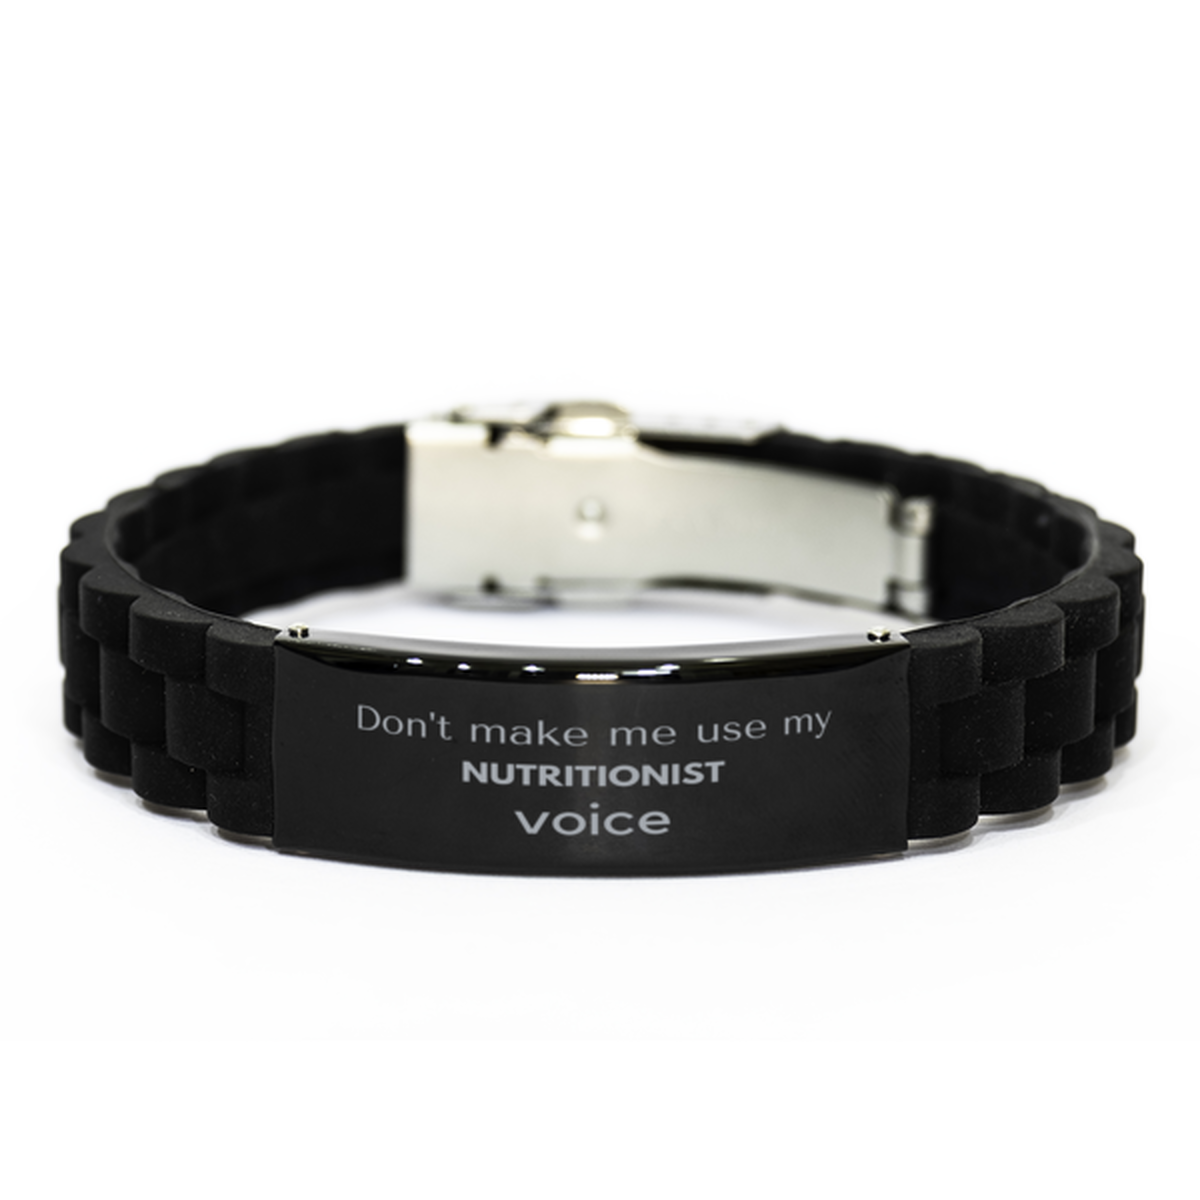 Don't make me use my Nutritionist voice, Sarcasm Nutritionist Gifts, Christmas Nutritionist Black Glidelock Clasp Bracelet Birthday Unique Gifts For Nutritionist Coworkers, Men, Women, Colleague, Friends